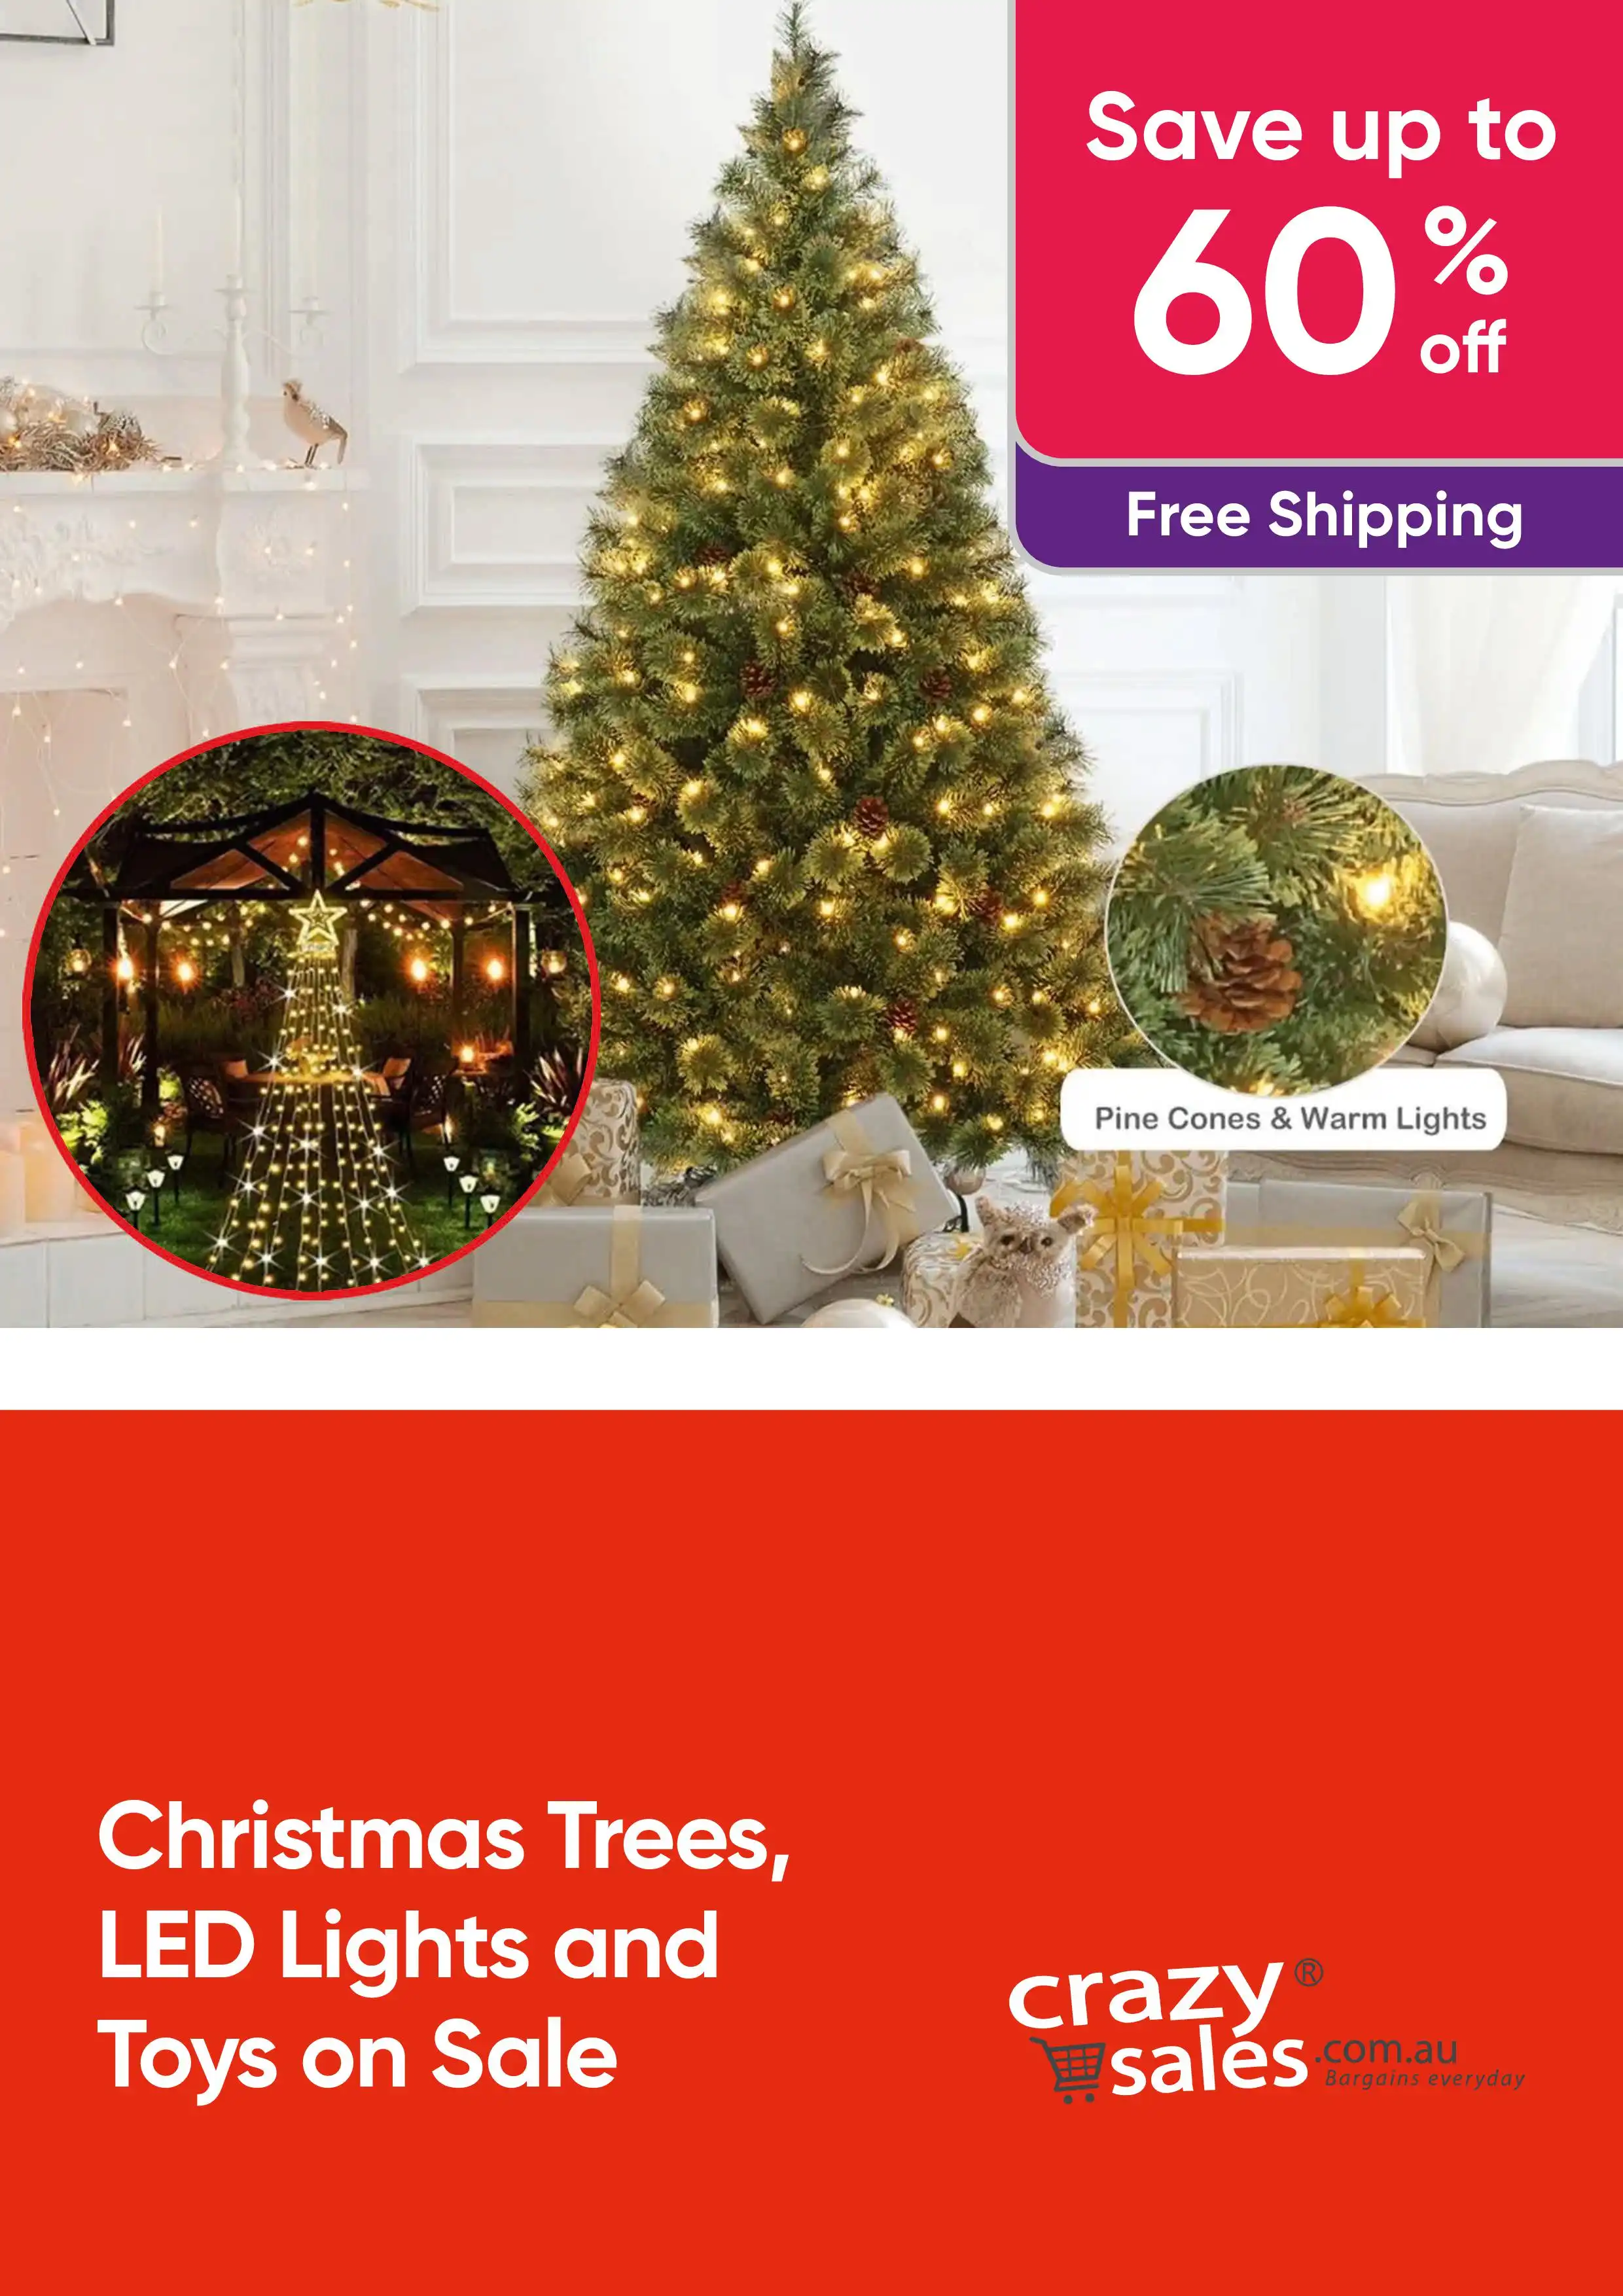 Christmas Trees, LED Lights and Toys Specials - Save Up to 60% Off RRP